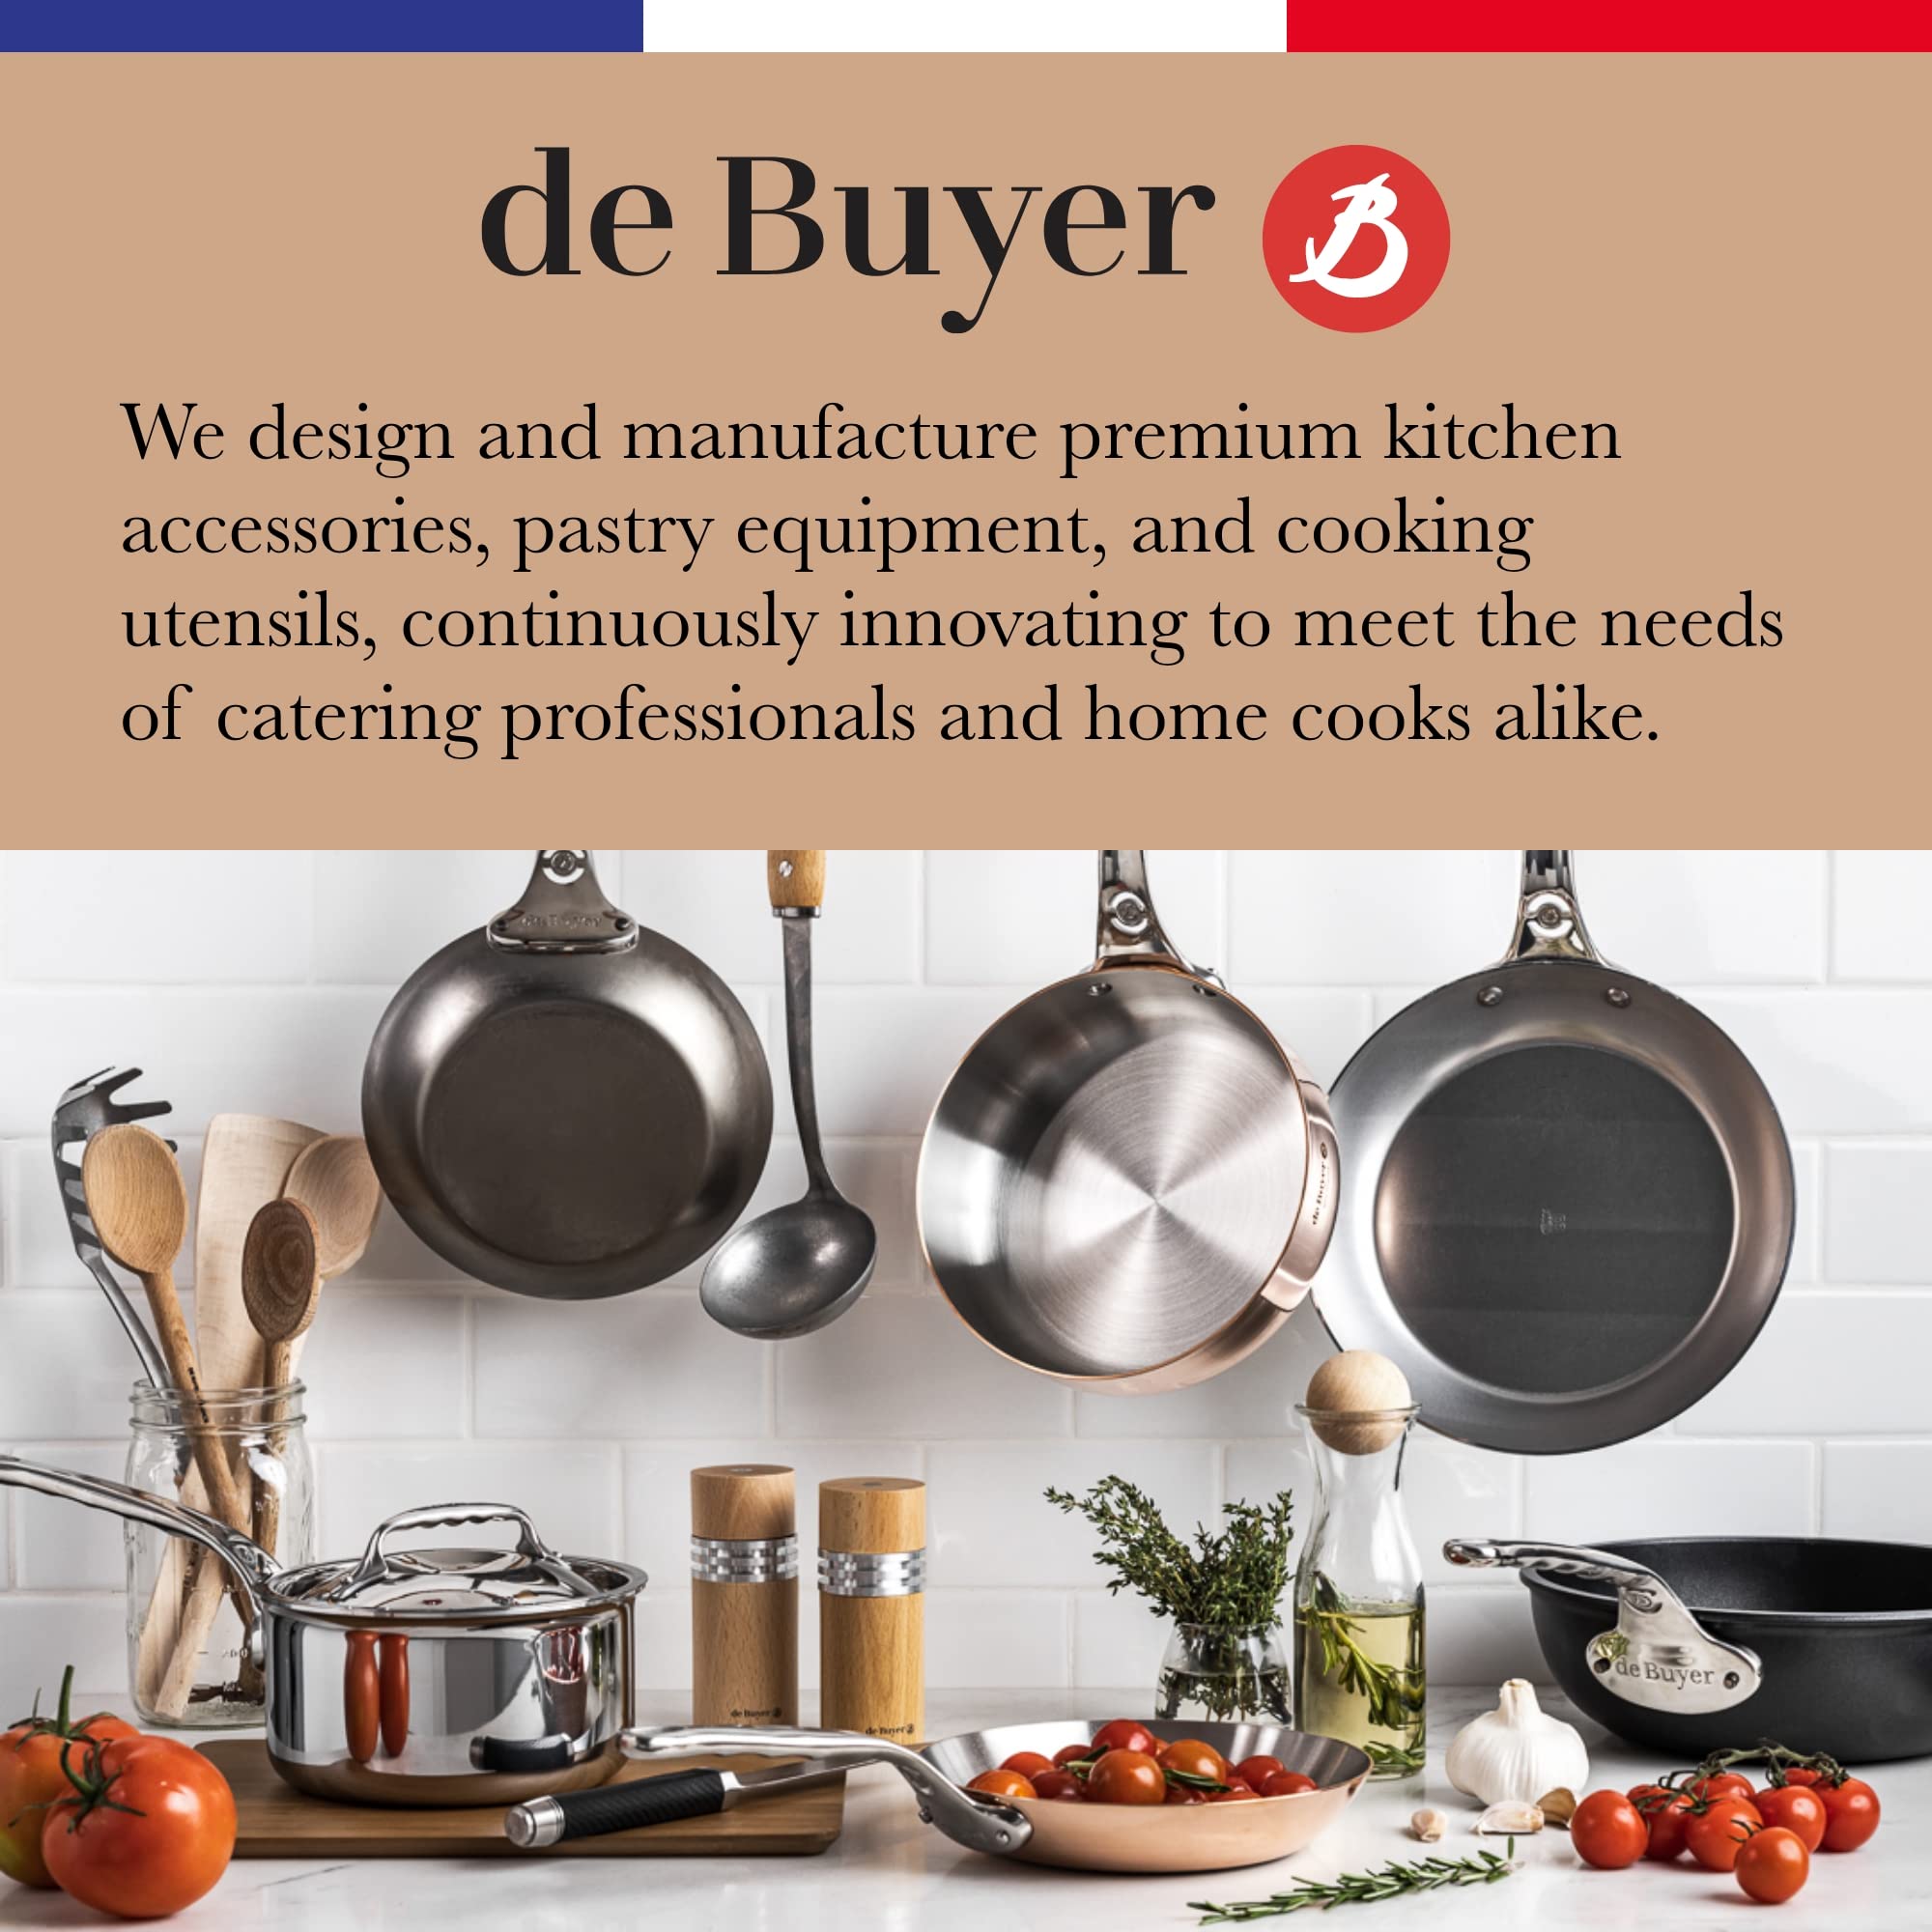 de Buyer LA LYONNAISE Blue Carbon Steel Fry Pan - 10.25” - Ideal for Browning, Simmering, Searing & Reheating - Naturally Nonstick - Made in France